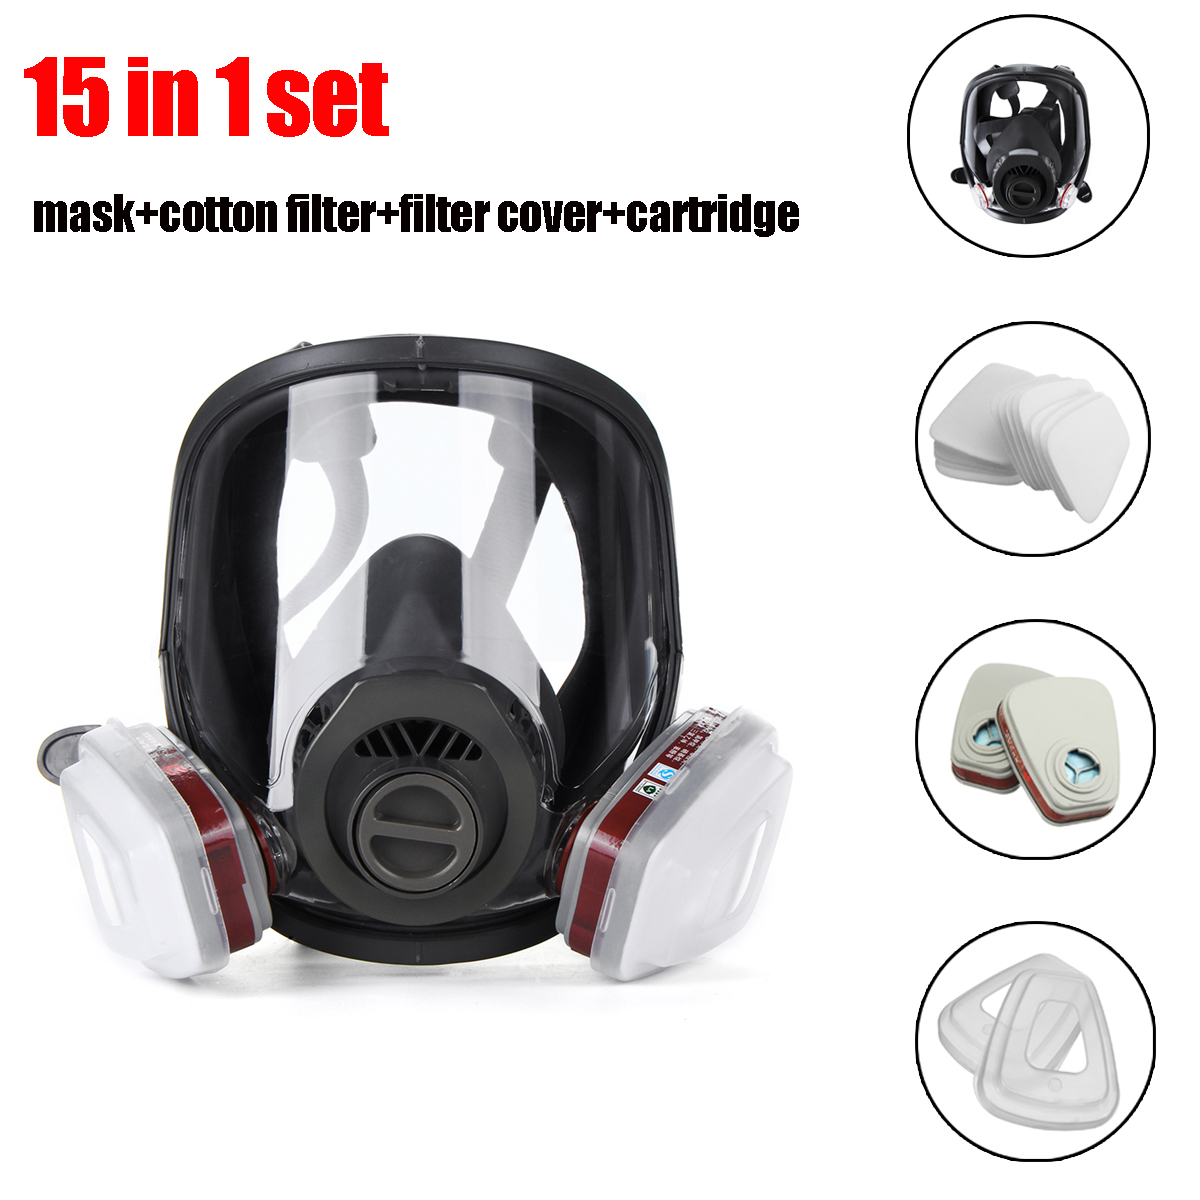 15 in 1 Full Face Gas Mask Facepiece Respirator Painting Spraying Mask 6800 Dust 16